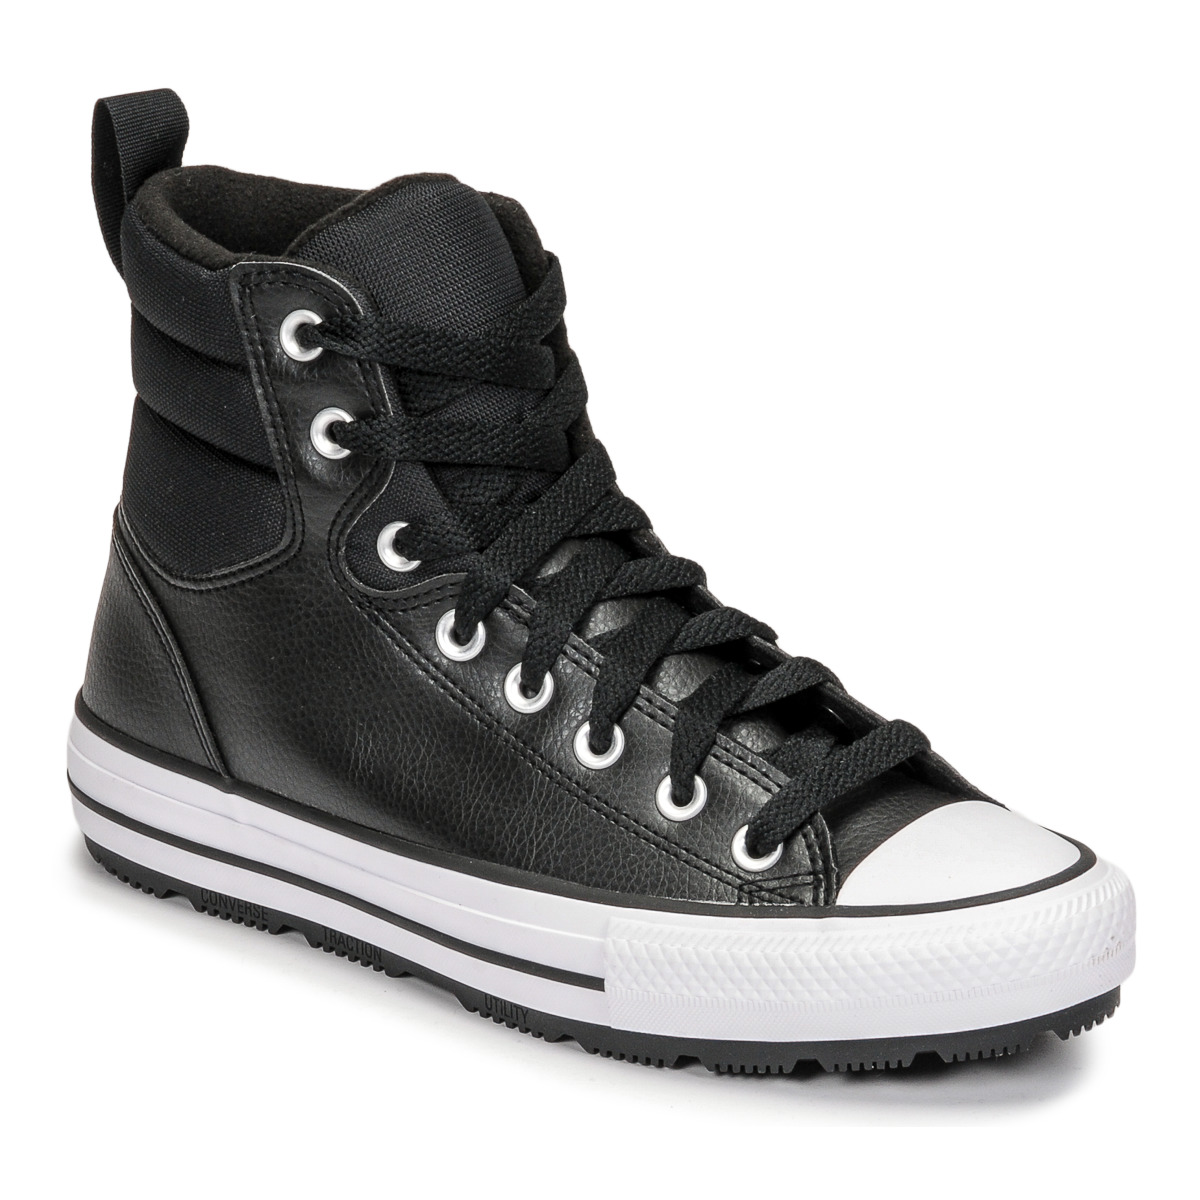 Chaussures Baskets montantes Converse CHUCK TAYLOR ALL STAR BERKSHIRE BOOT COLD FUSION HI Noir